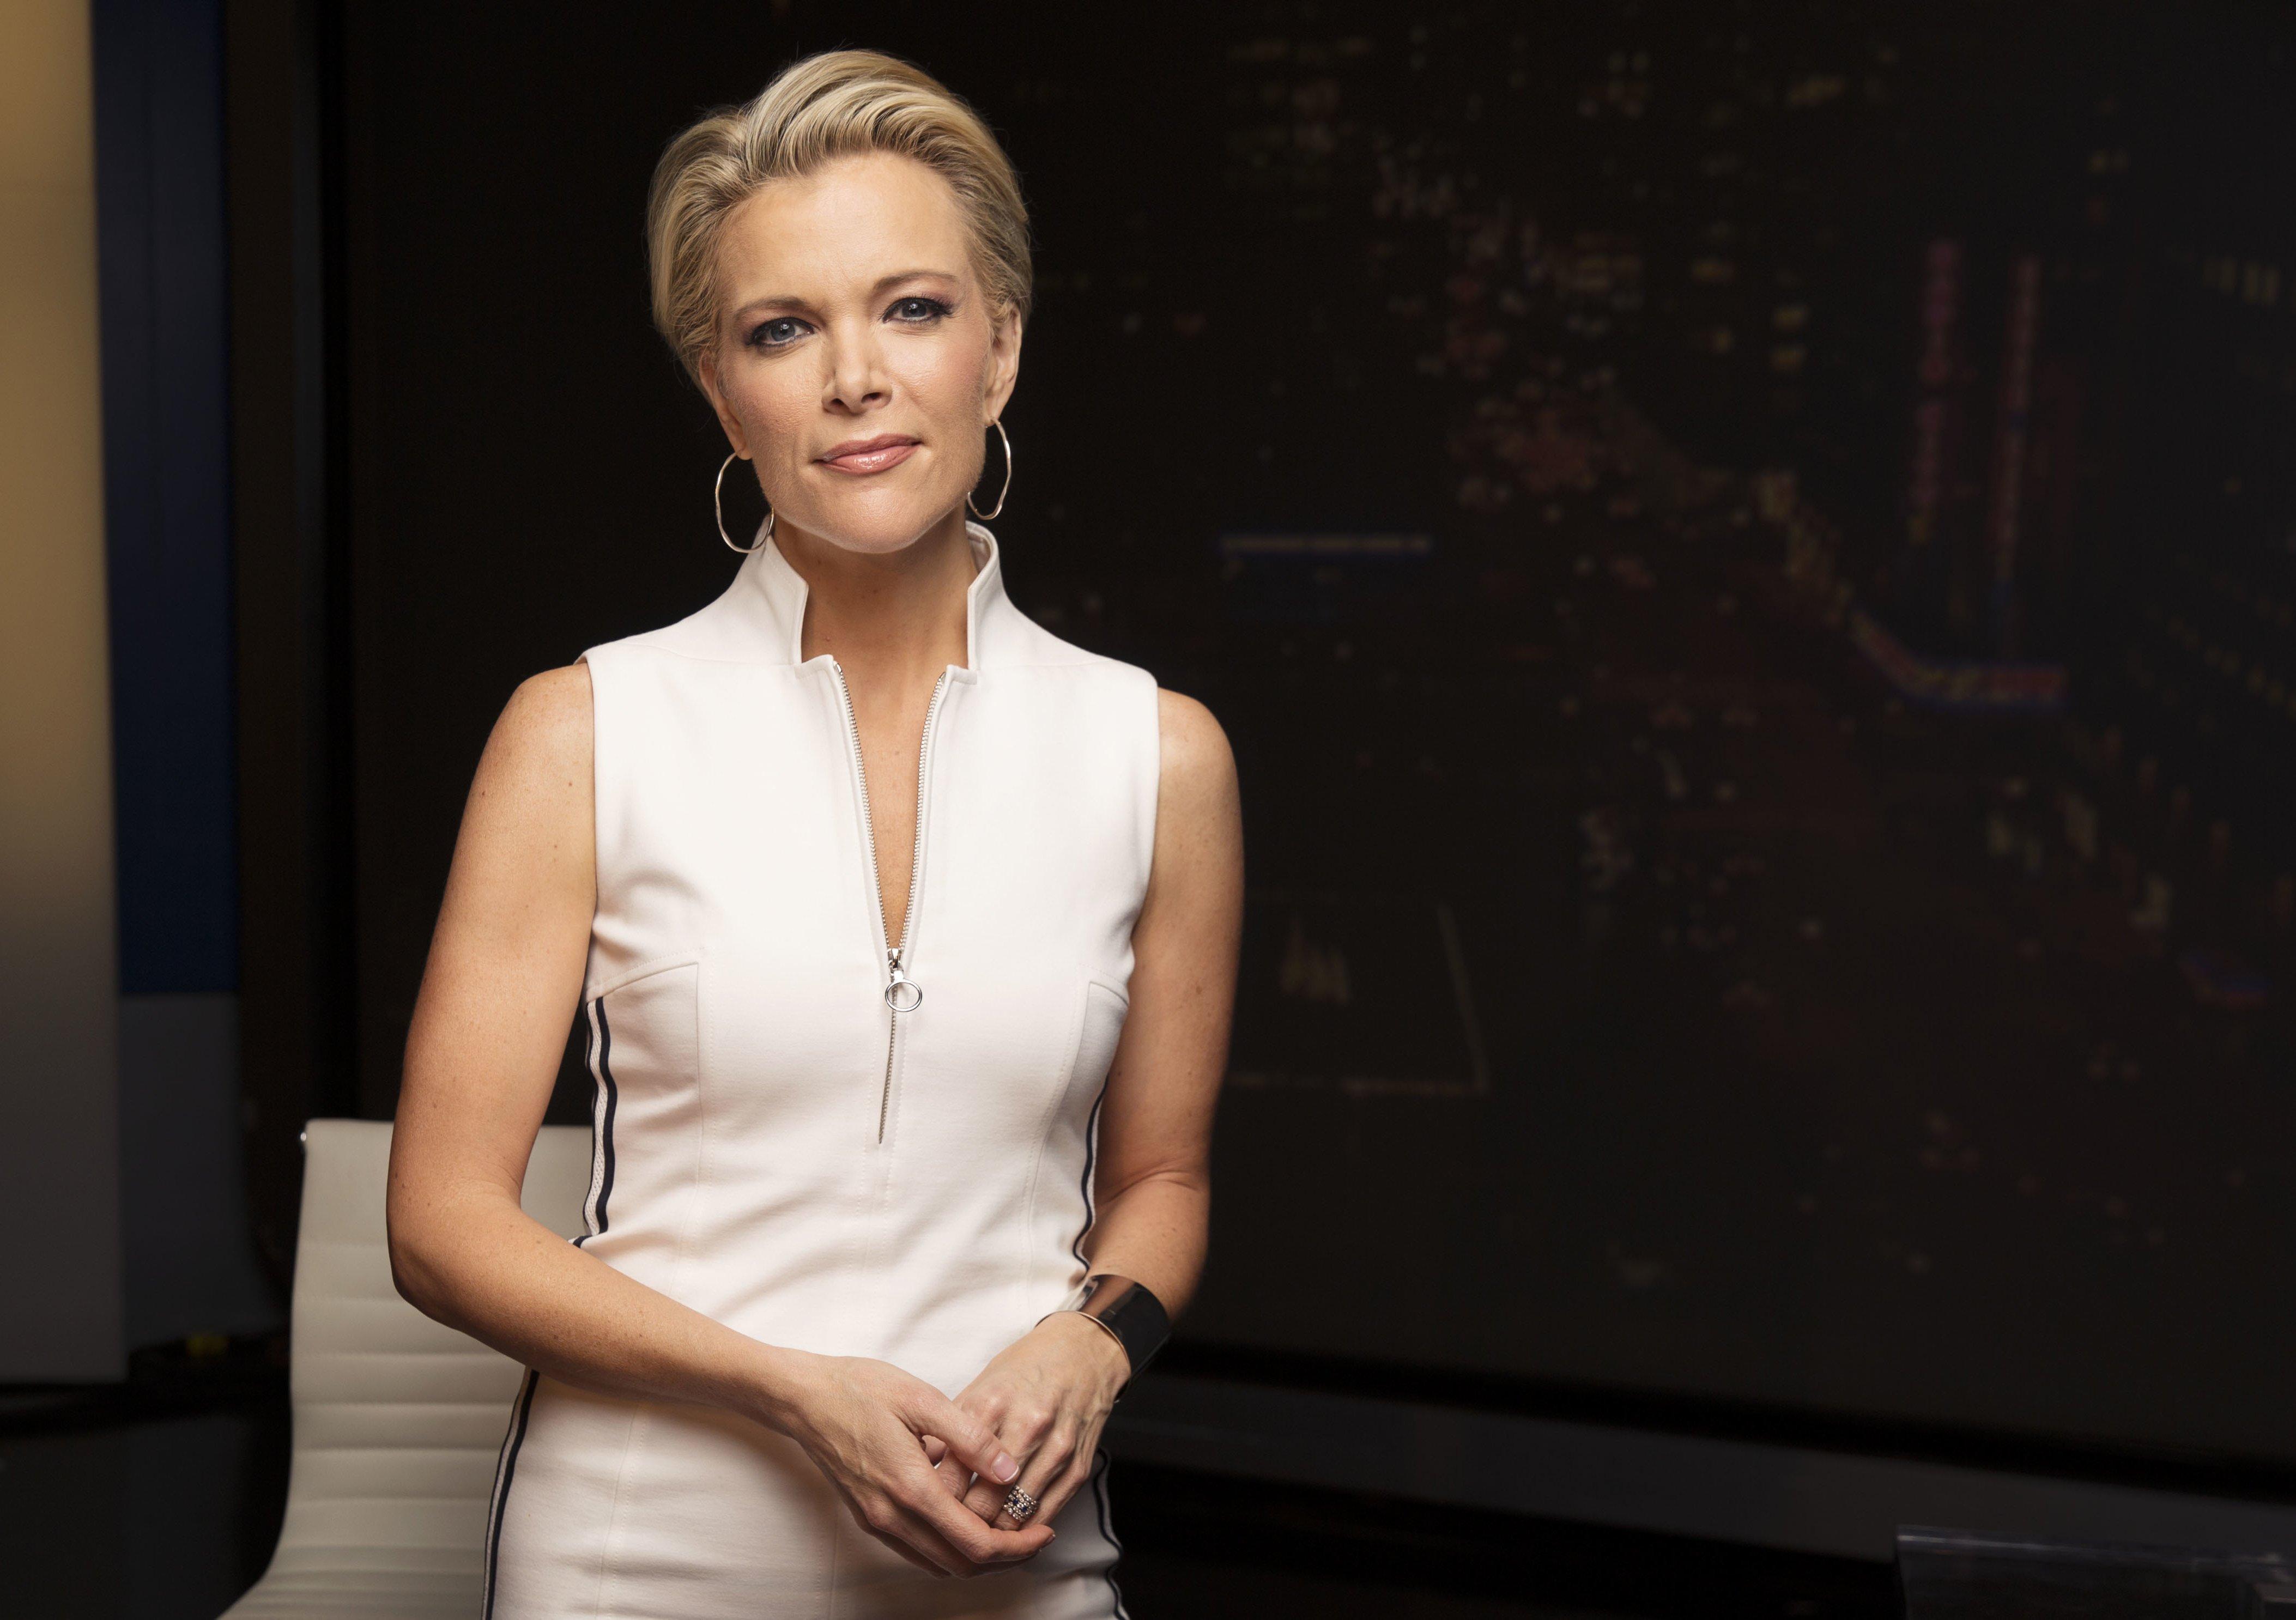 Megyn Kelly says it's important people learn of Trump's actions